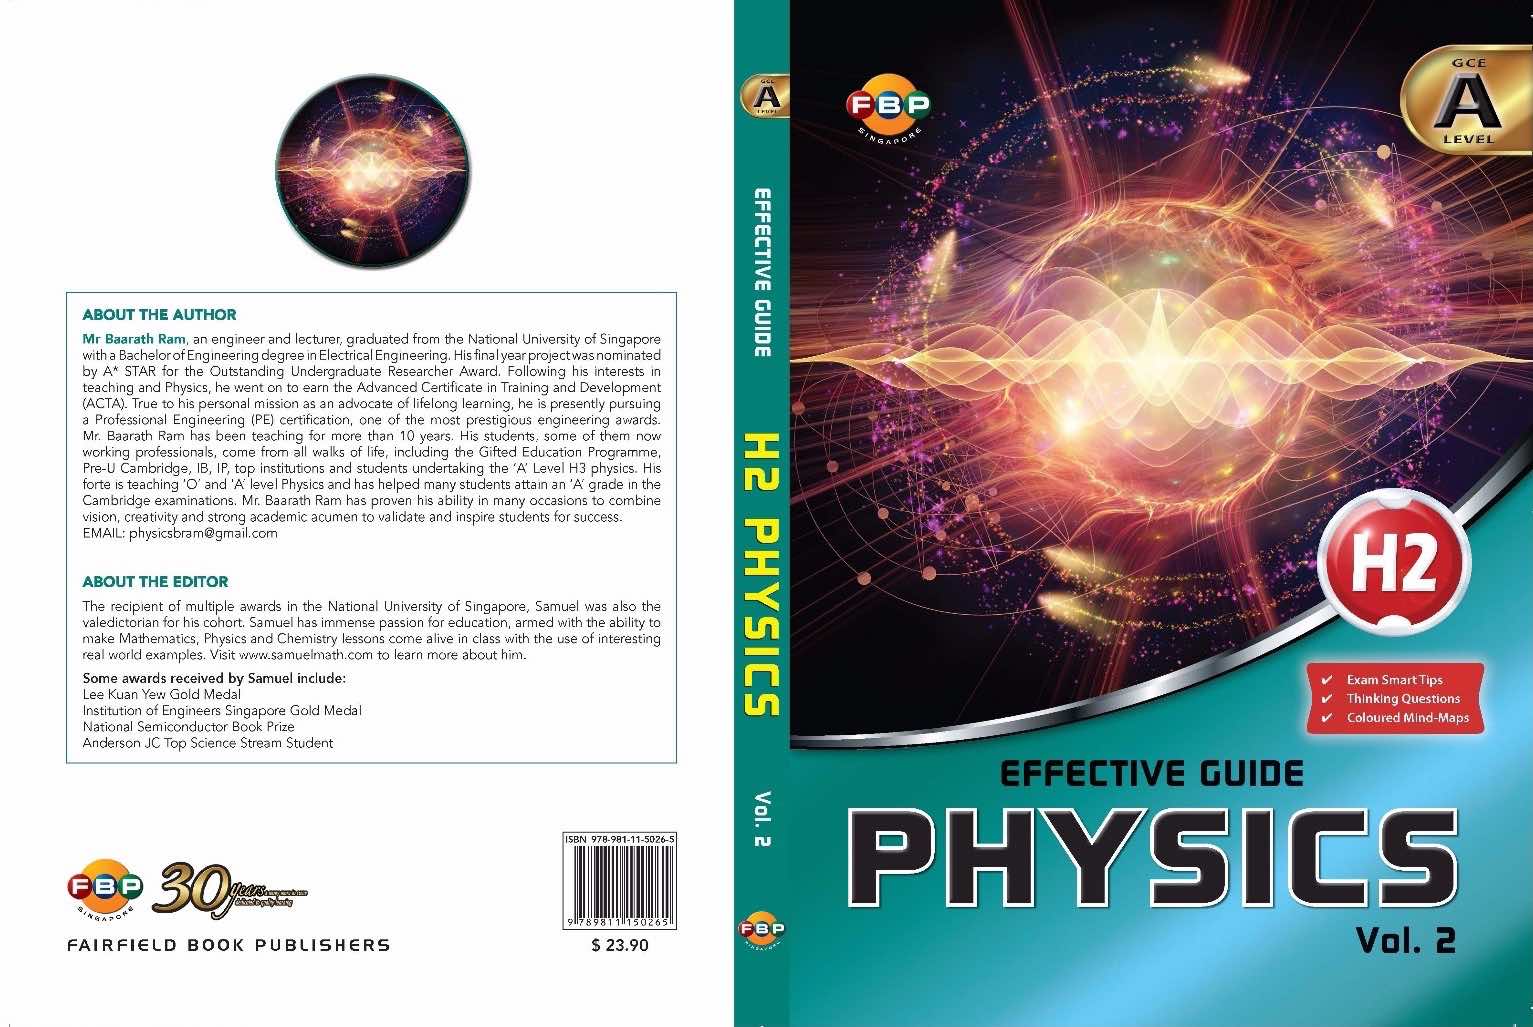 GCE A Level: Effective Guide Physics Vol 2